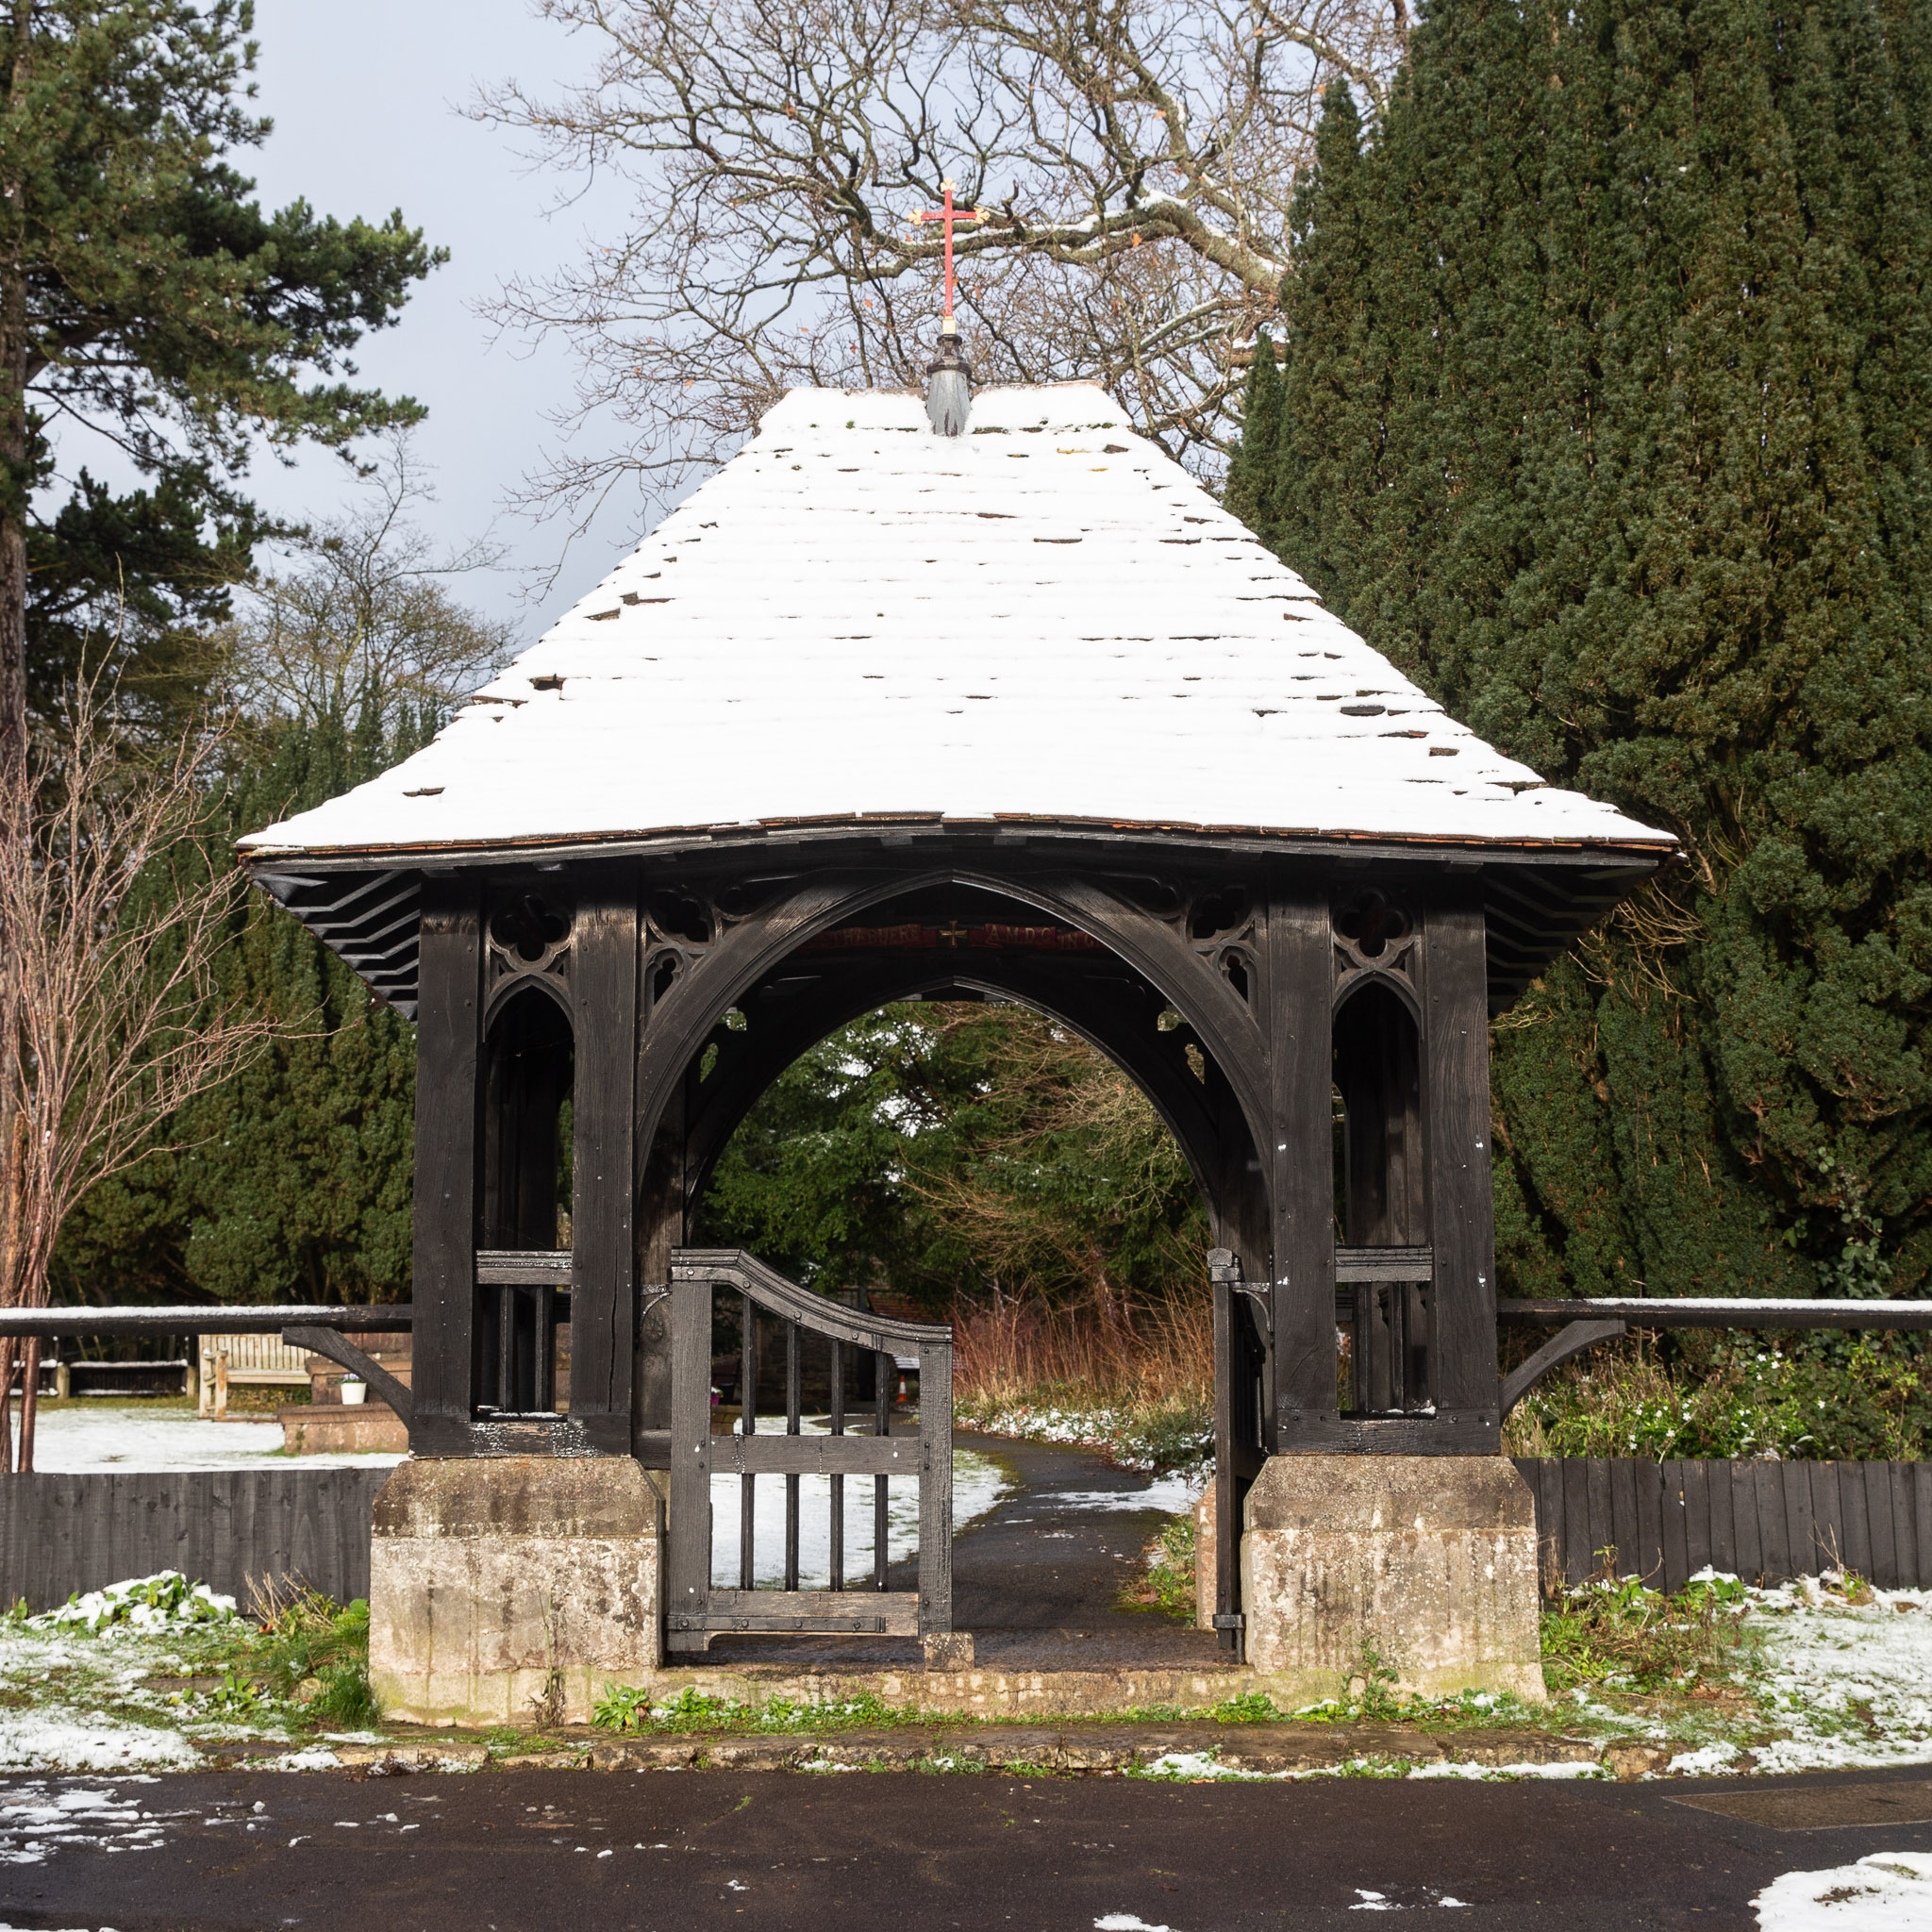 Lychgate
lychgate | ˈlɪtʃɡeɪt | (also lichgate)

noun

a roofed gateway to a churchyard, formerly used at burials for sheltering a coffin until the clergyma...